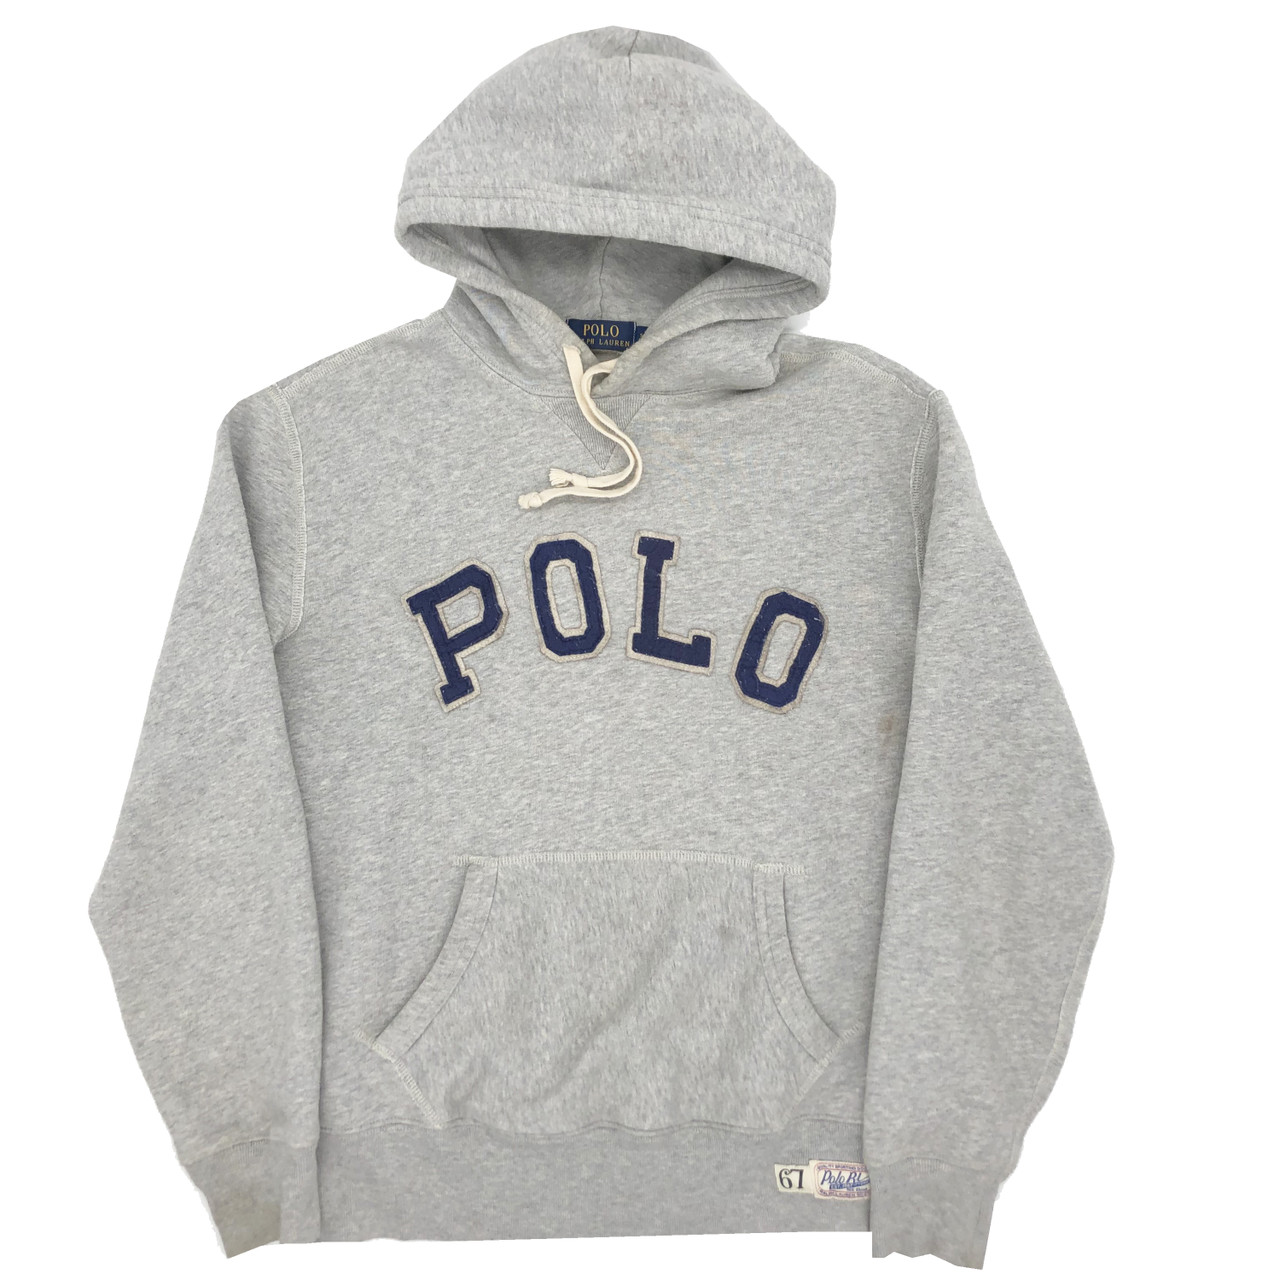 Polo Ralph Lauren Spell Out Hoodie